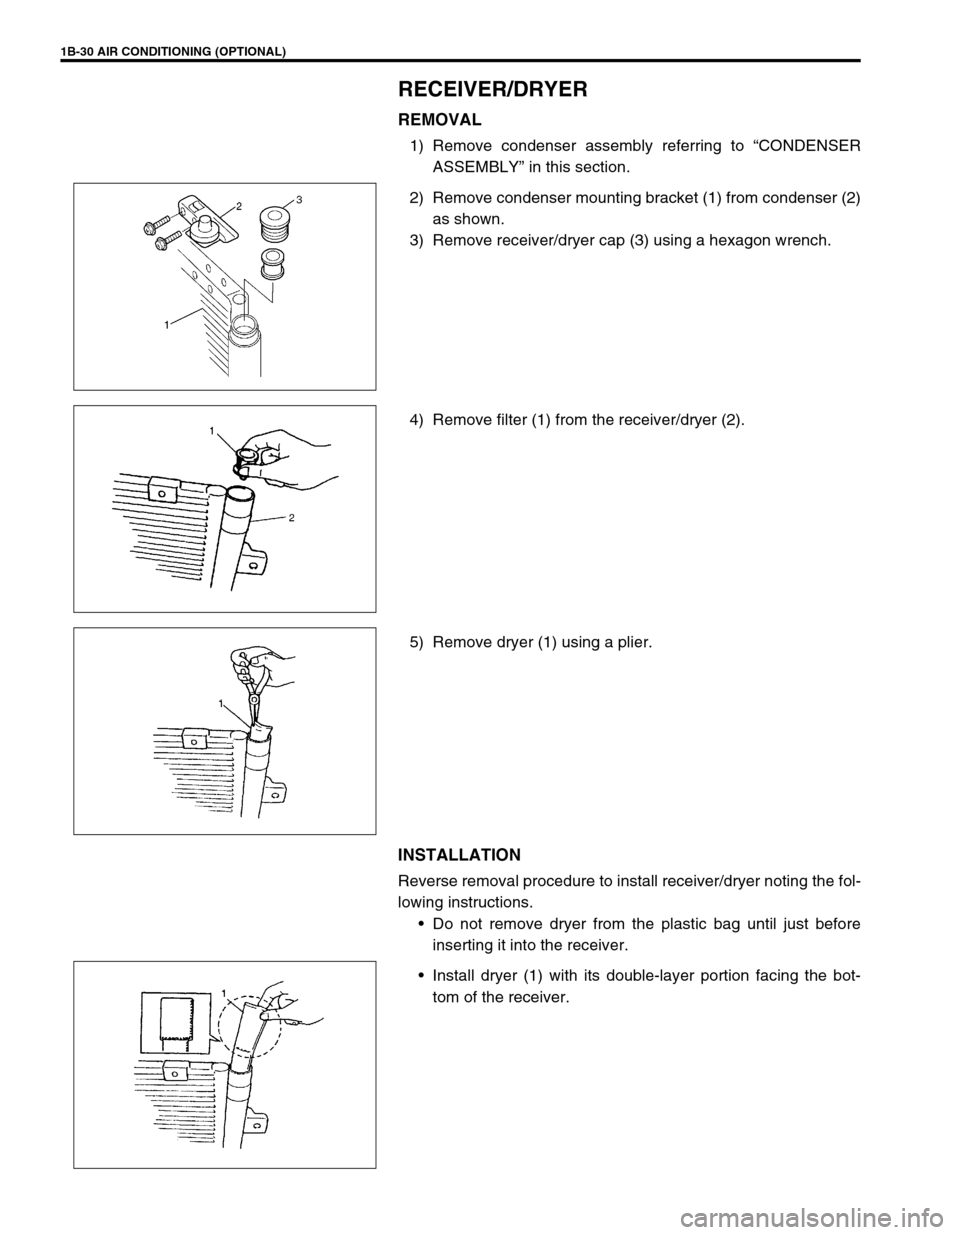 SUZUKI SWIFT 2000 1.G RG413 Service Workshop Manual 1B-30 AIR CONDITIONING (OPTIONAL)
RECEIVER/DRYER
REMOVAL
1) Remove condenser assembly referring to “CONDENSER
ASSEMBLY” in this section.
2) Remove condenser mounting bracket (1) from condenser (2)